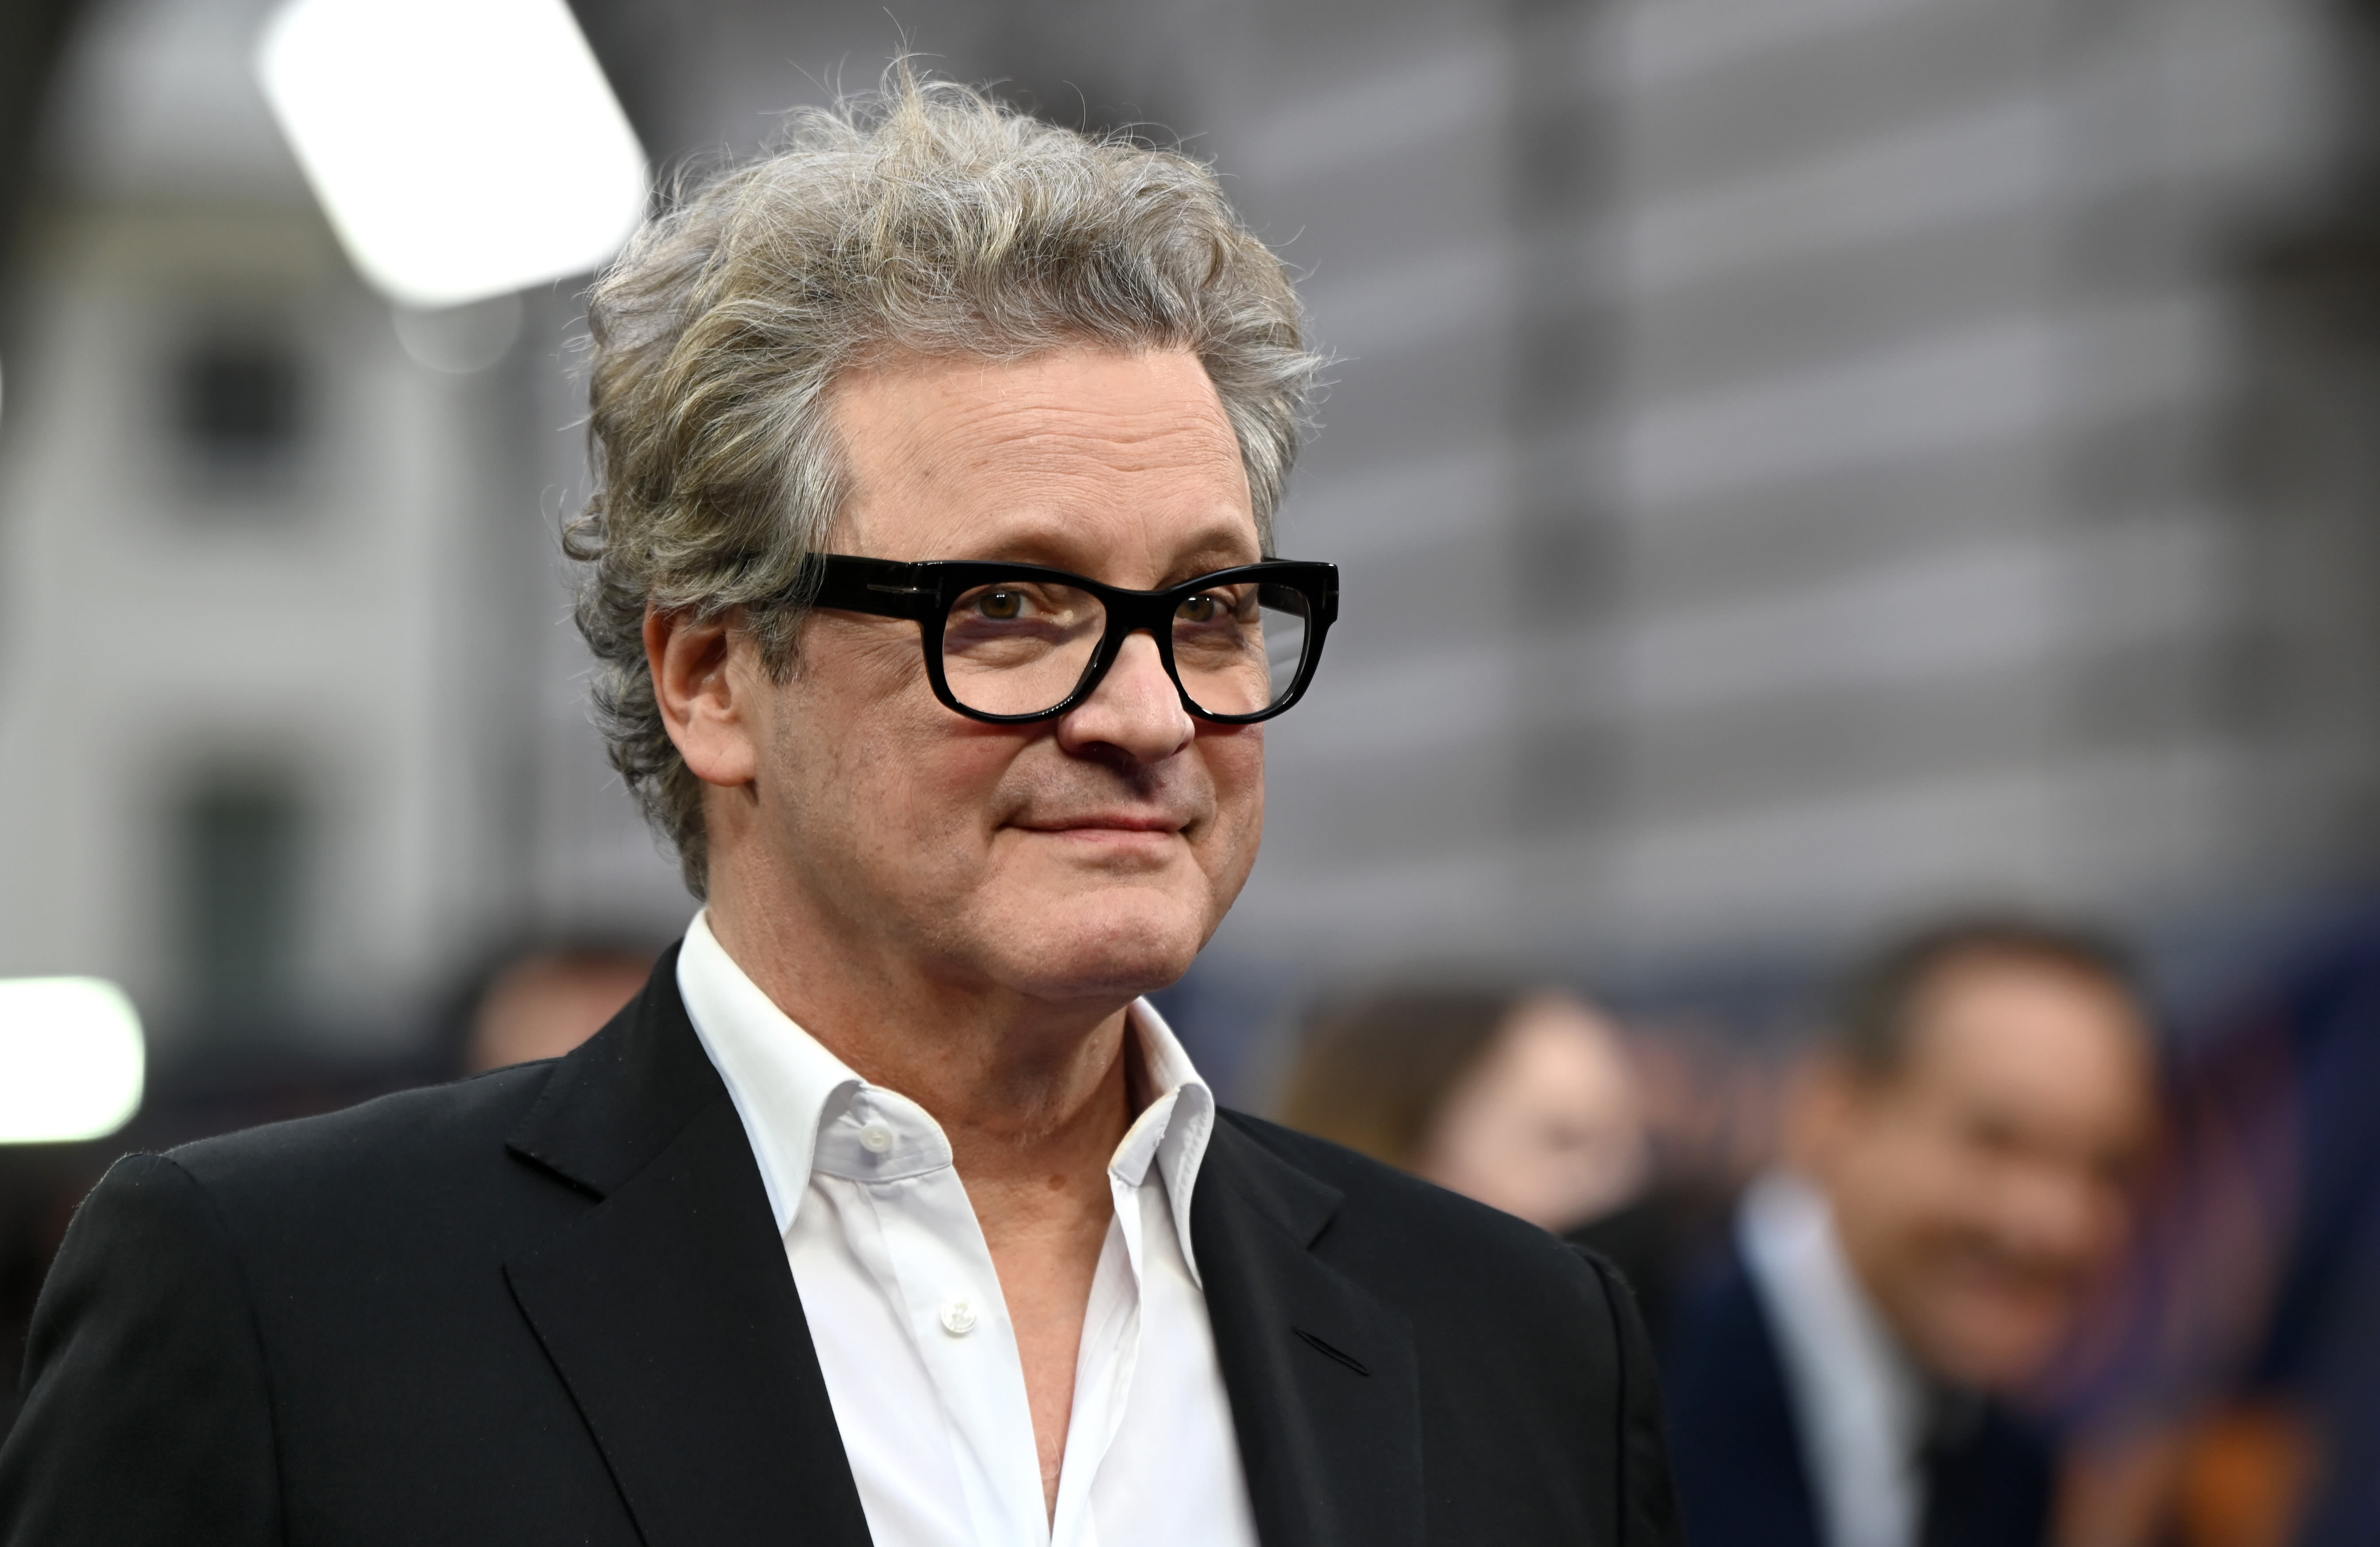 Colin Firth Joins ‘Young Sherlock’ Amazon Series